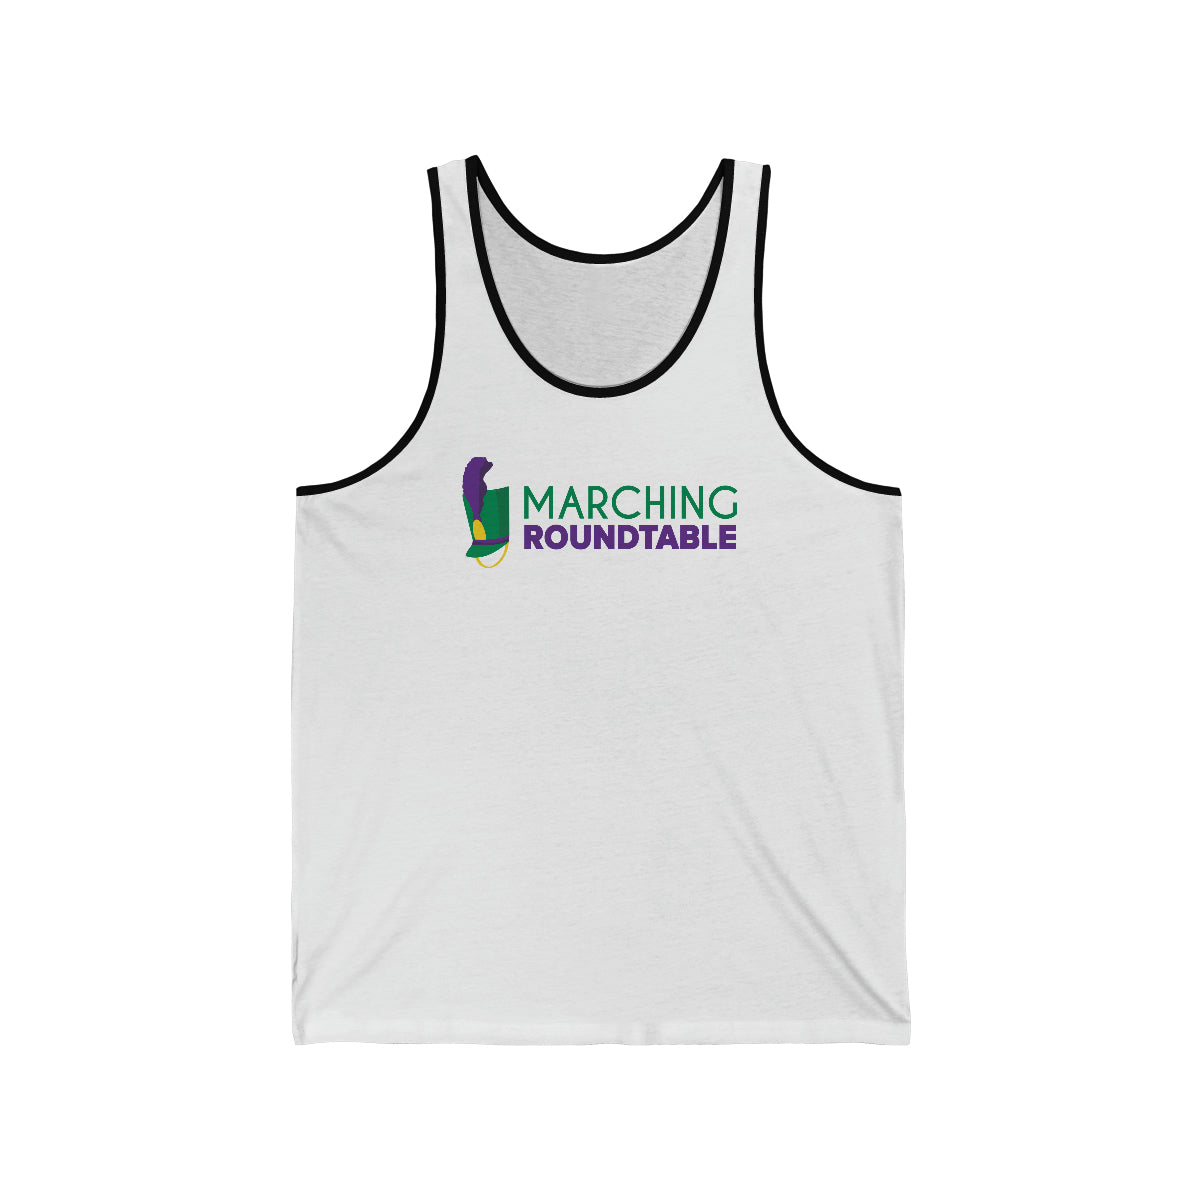 Roundtable Tank